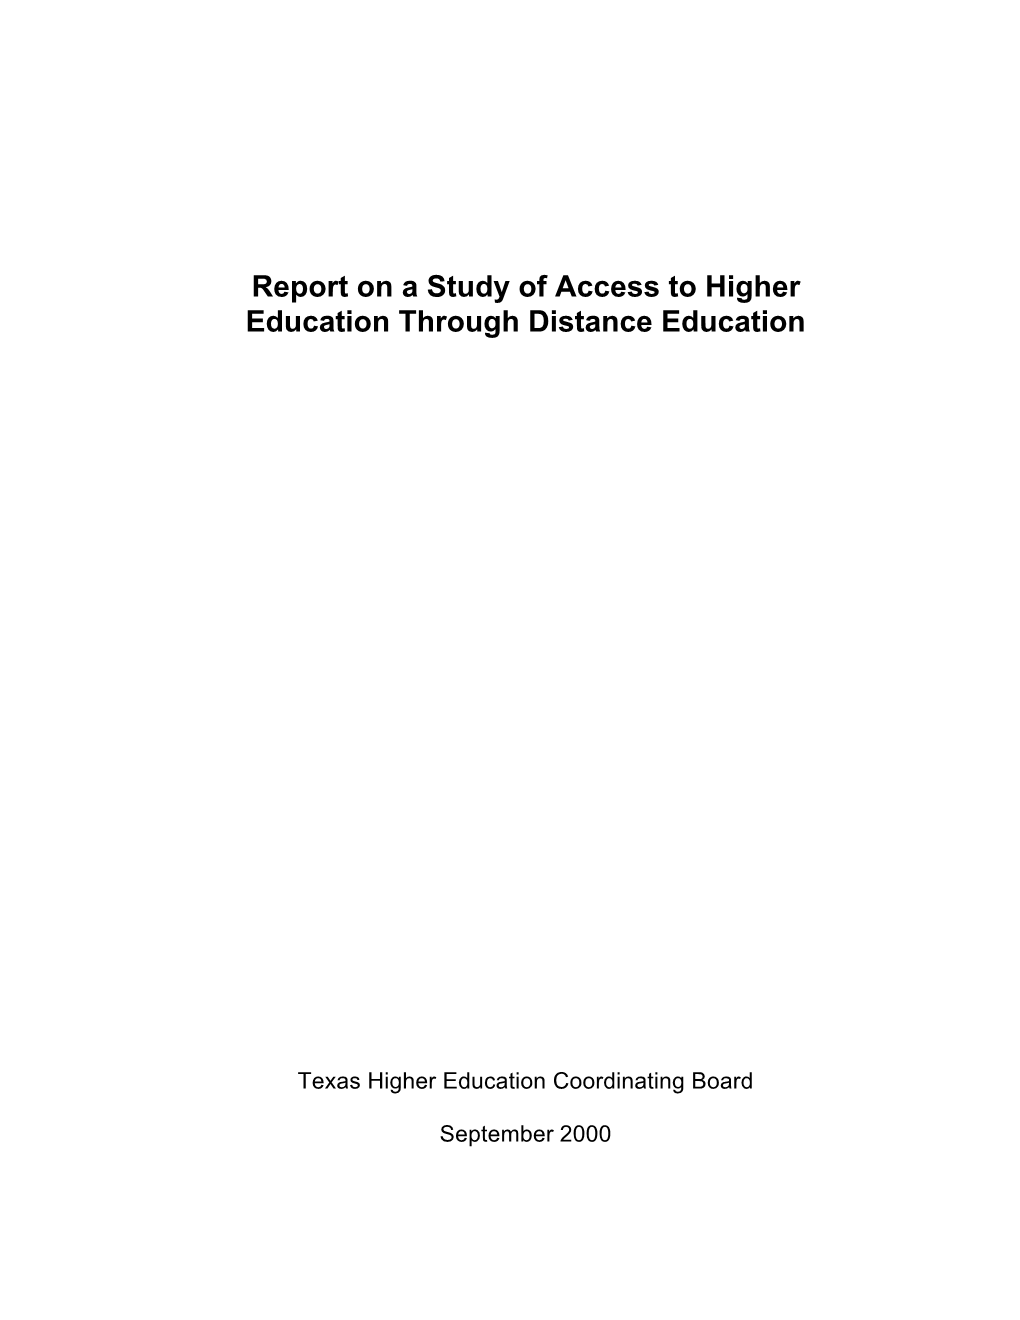 Report on a Study of Access to Higher Education Through Distance Education